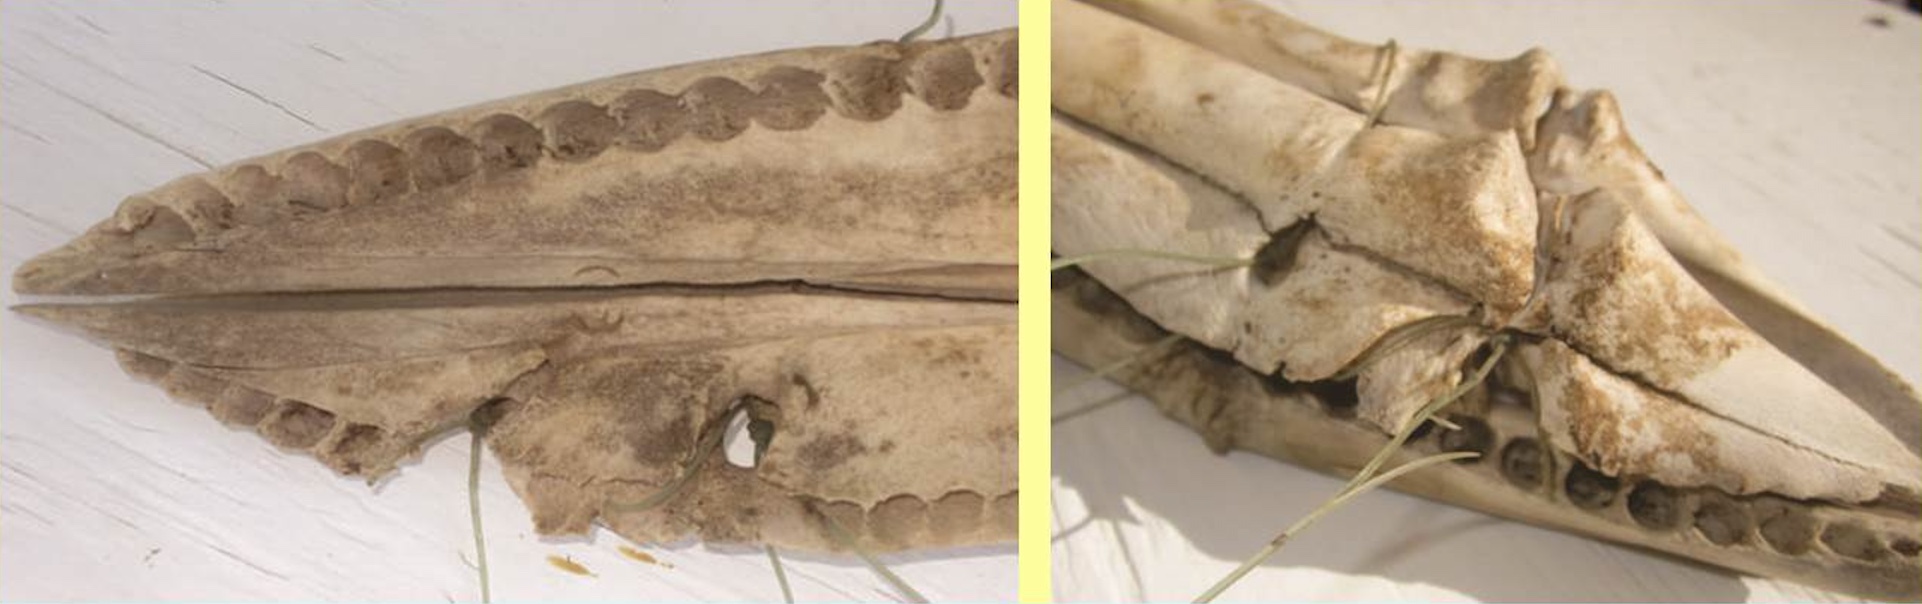 Fig7 - Post-maceration examination of the rostral palate (left) and the maxillary, premaxillary, and mandibular bones (right) reveals the degree of bone damage and remodeling resulting from chronic entanglement. Monofilament fishing line supports the skull and jaws in the wooden display rack.